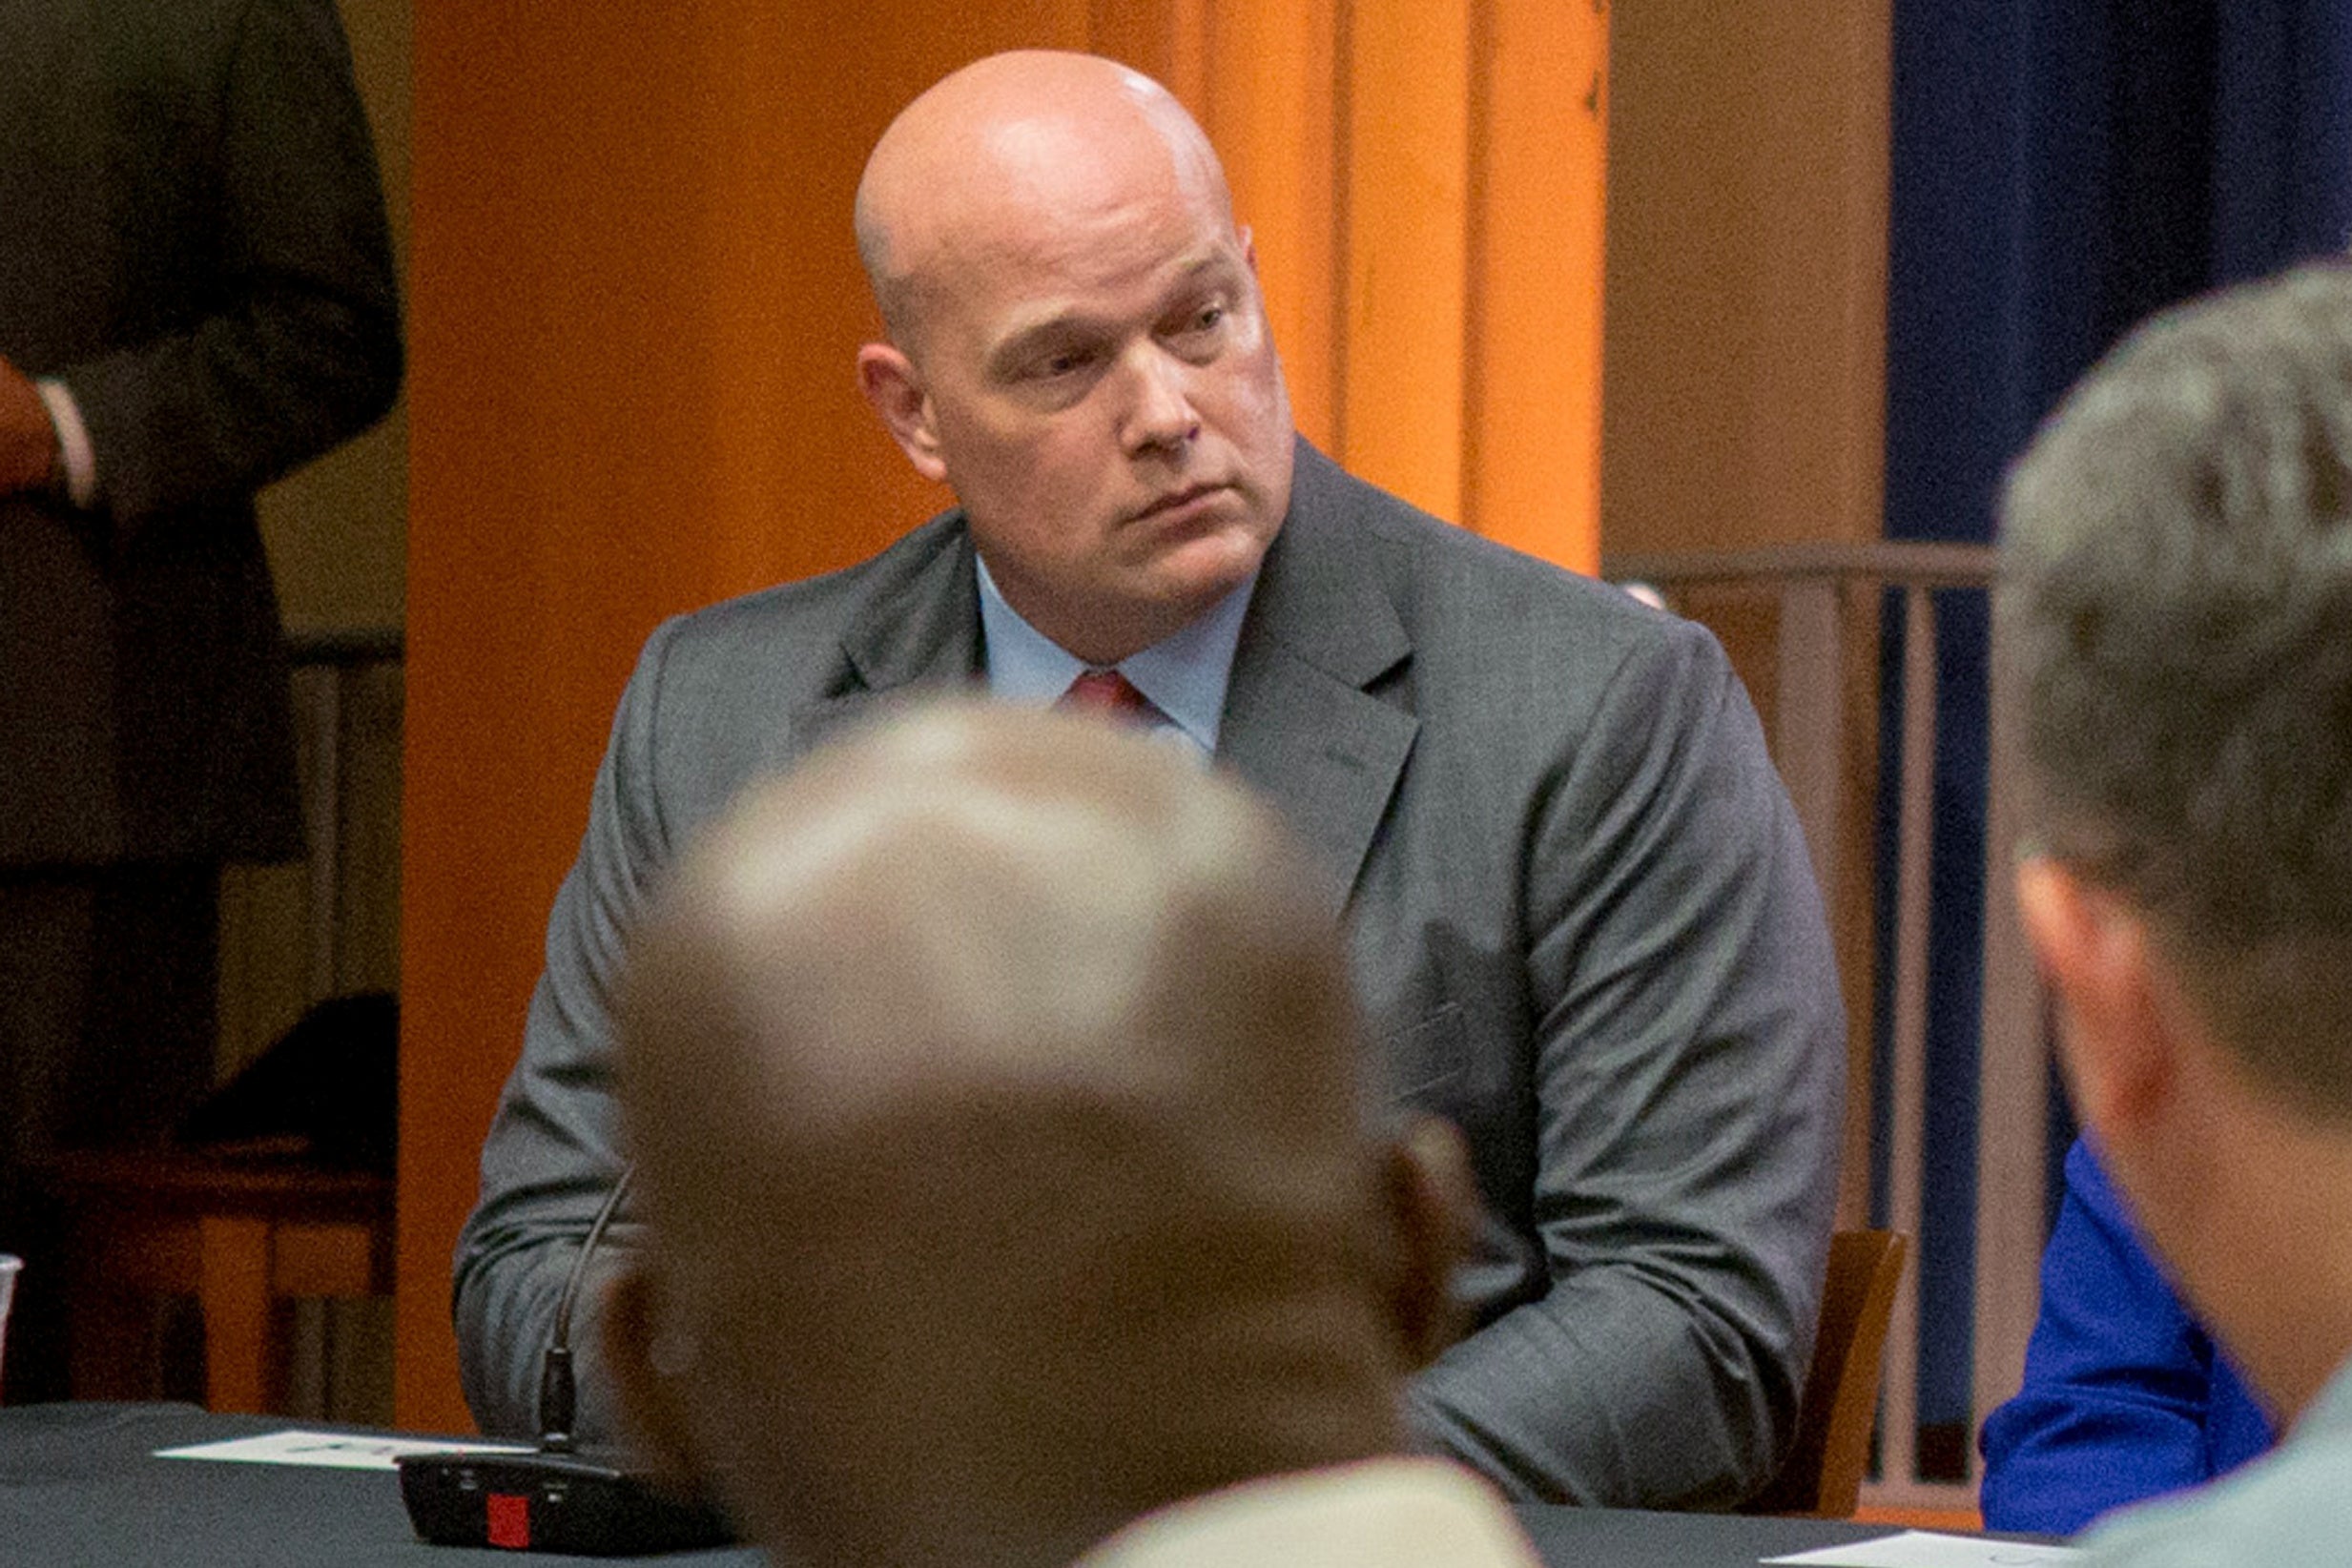 Whitaker sitting at a table. He's bald. The view of him is partially blocked by a different bald guy.